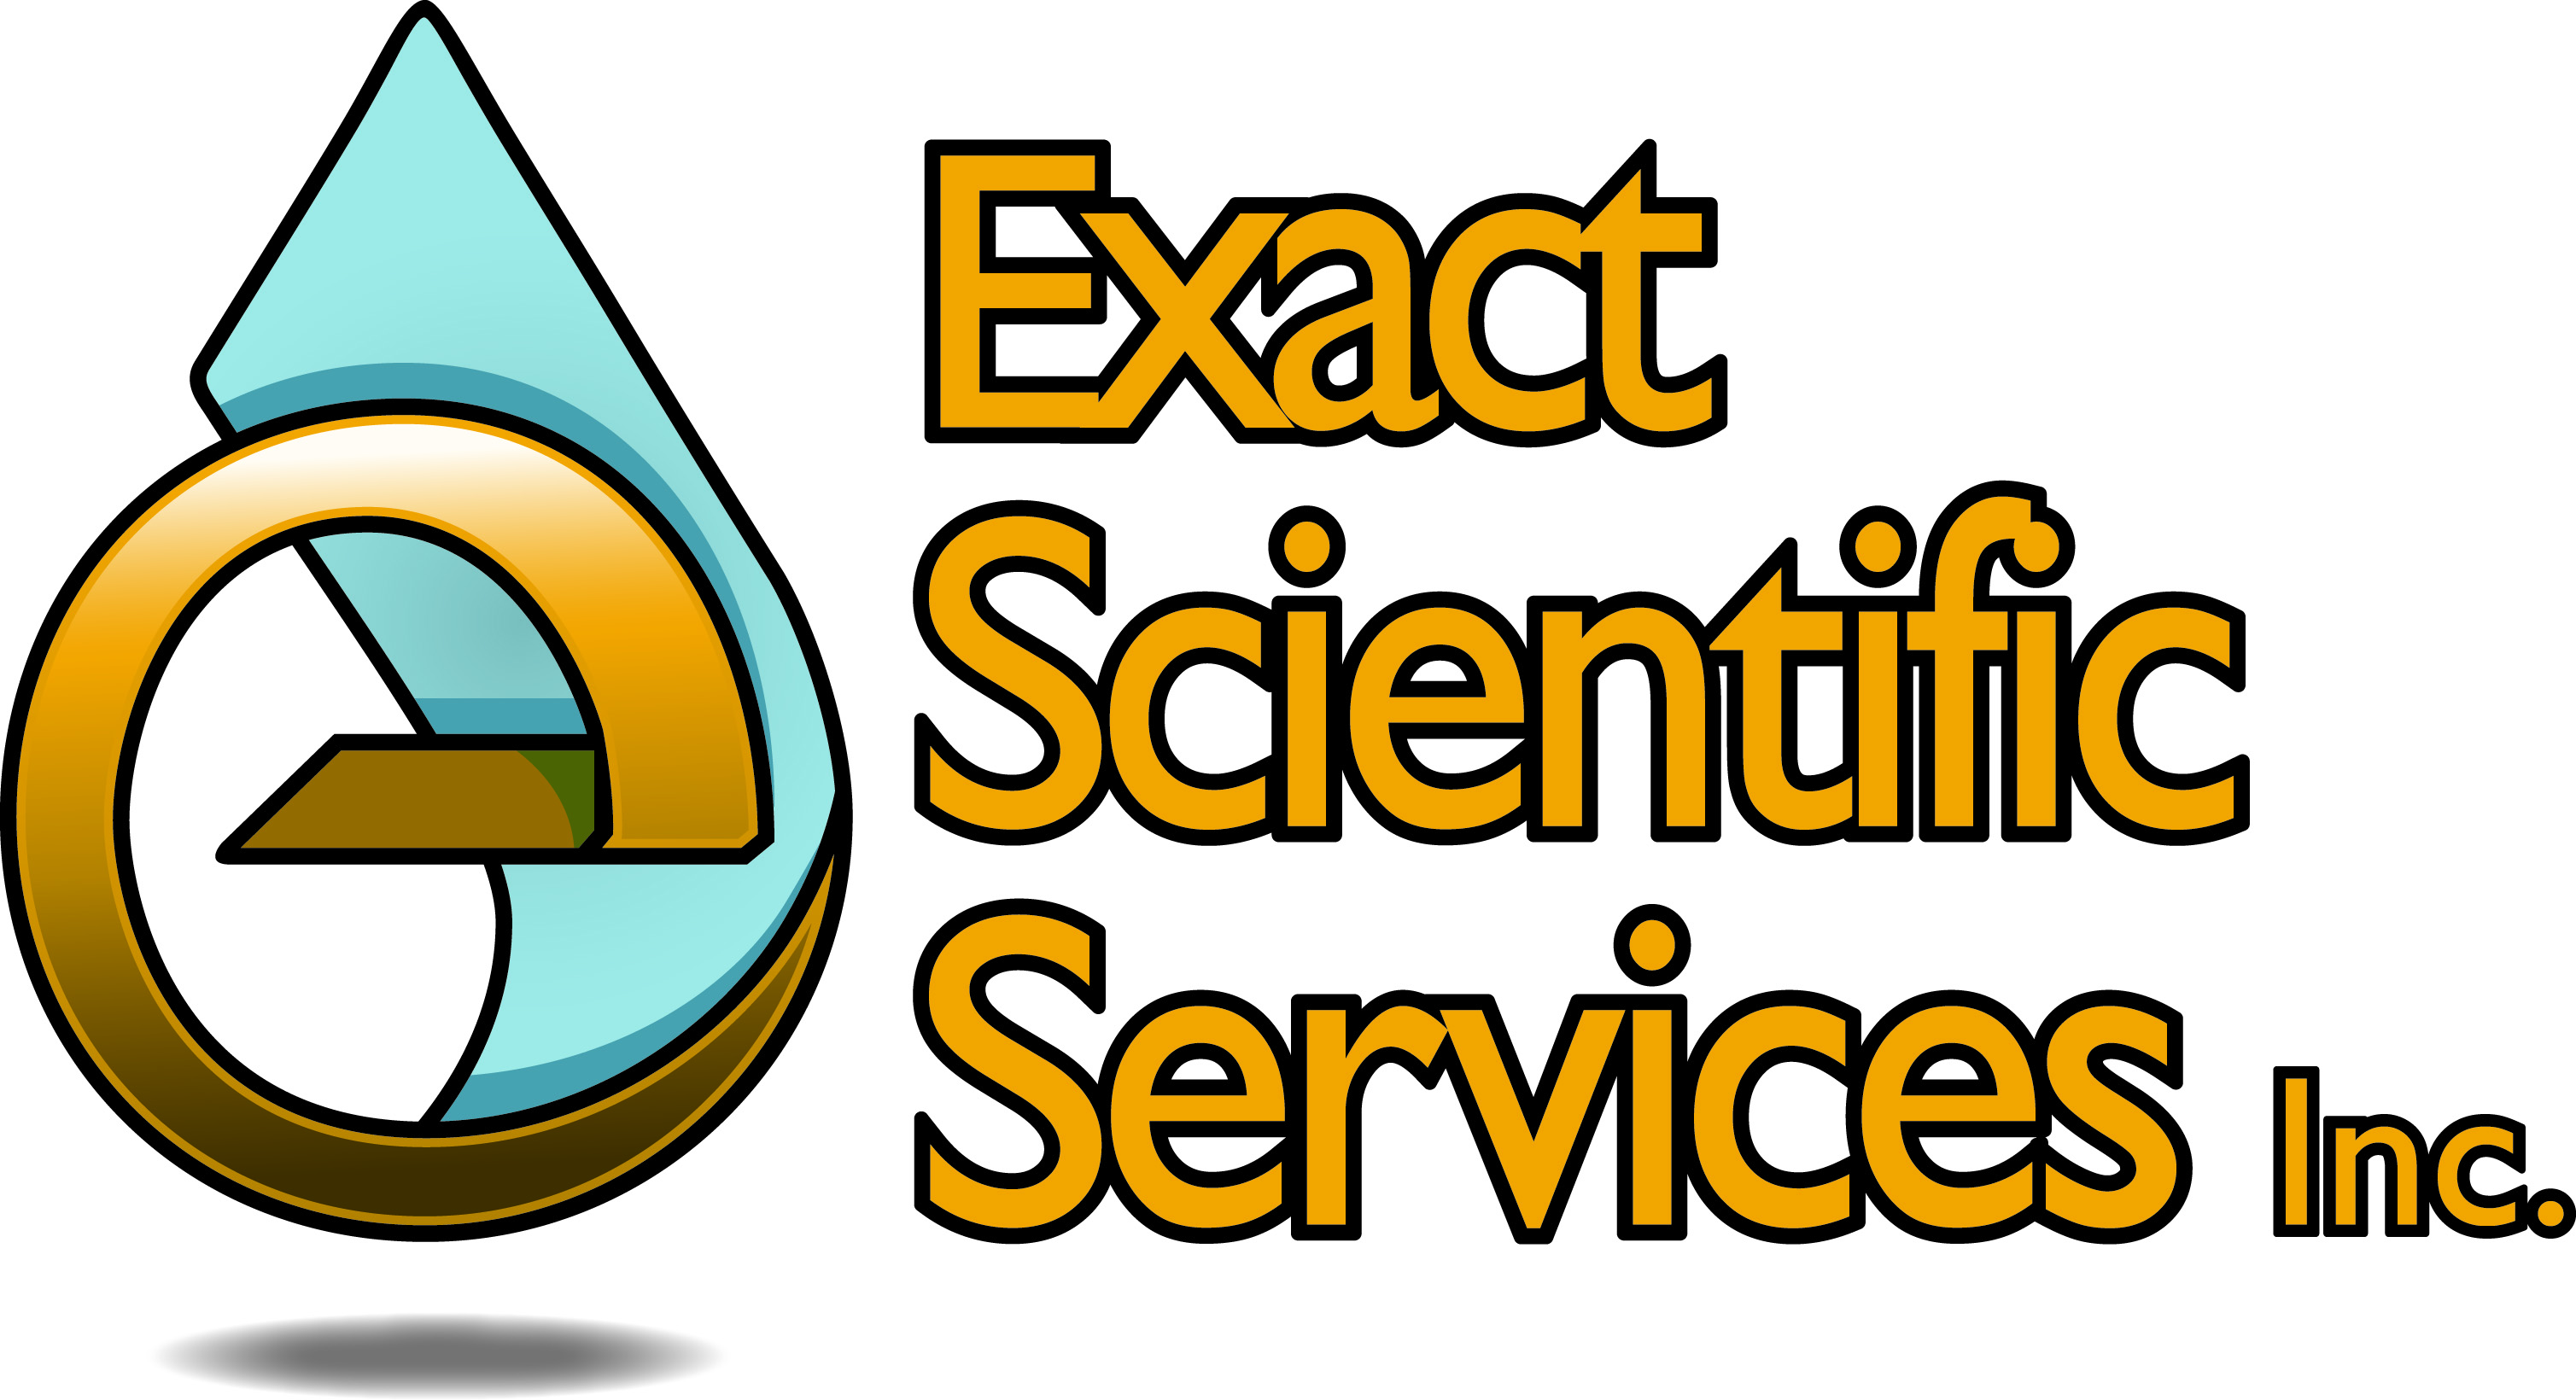 Exact Scientific Services, Inc - <div><span>As a quality assurance or R&D professional, you expect fast, accurate, and client-foc